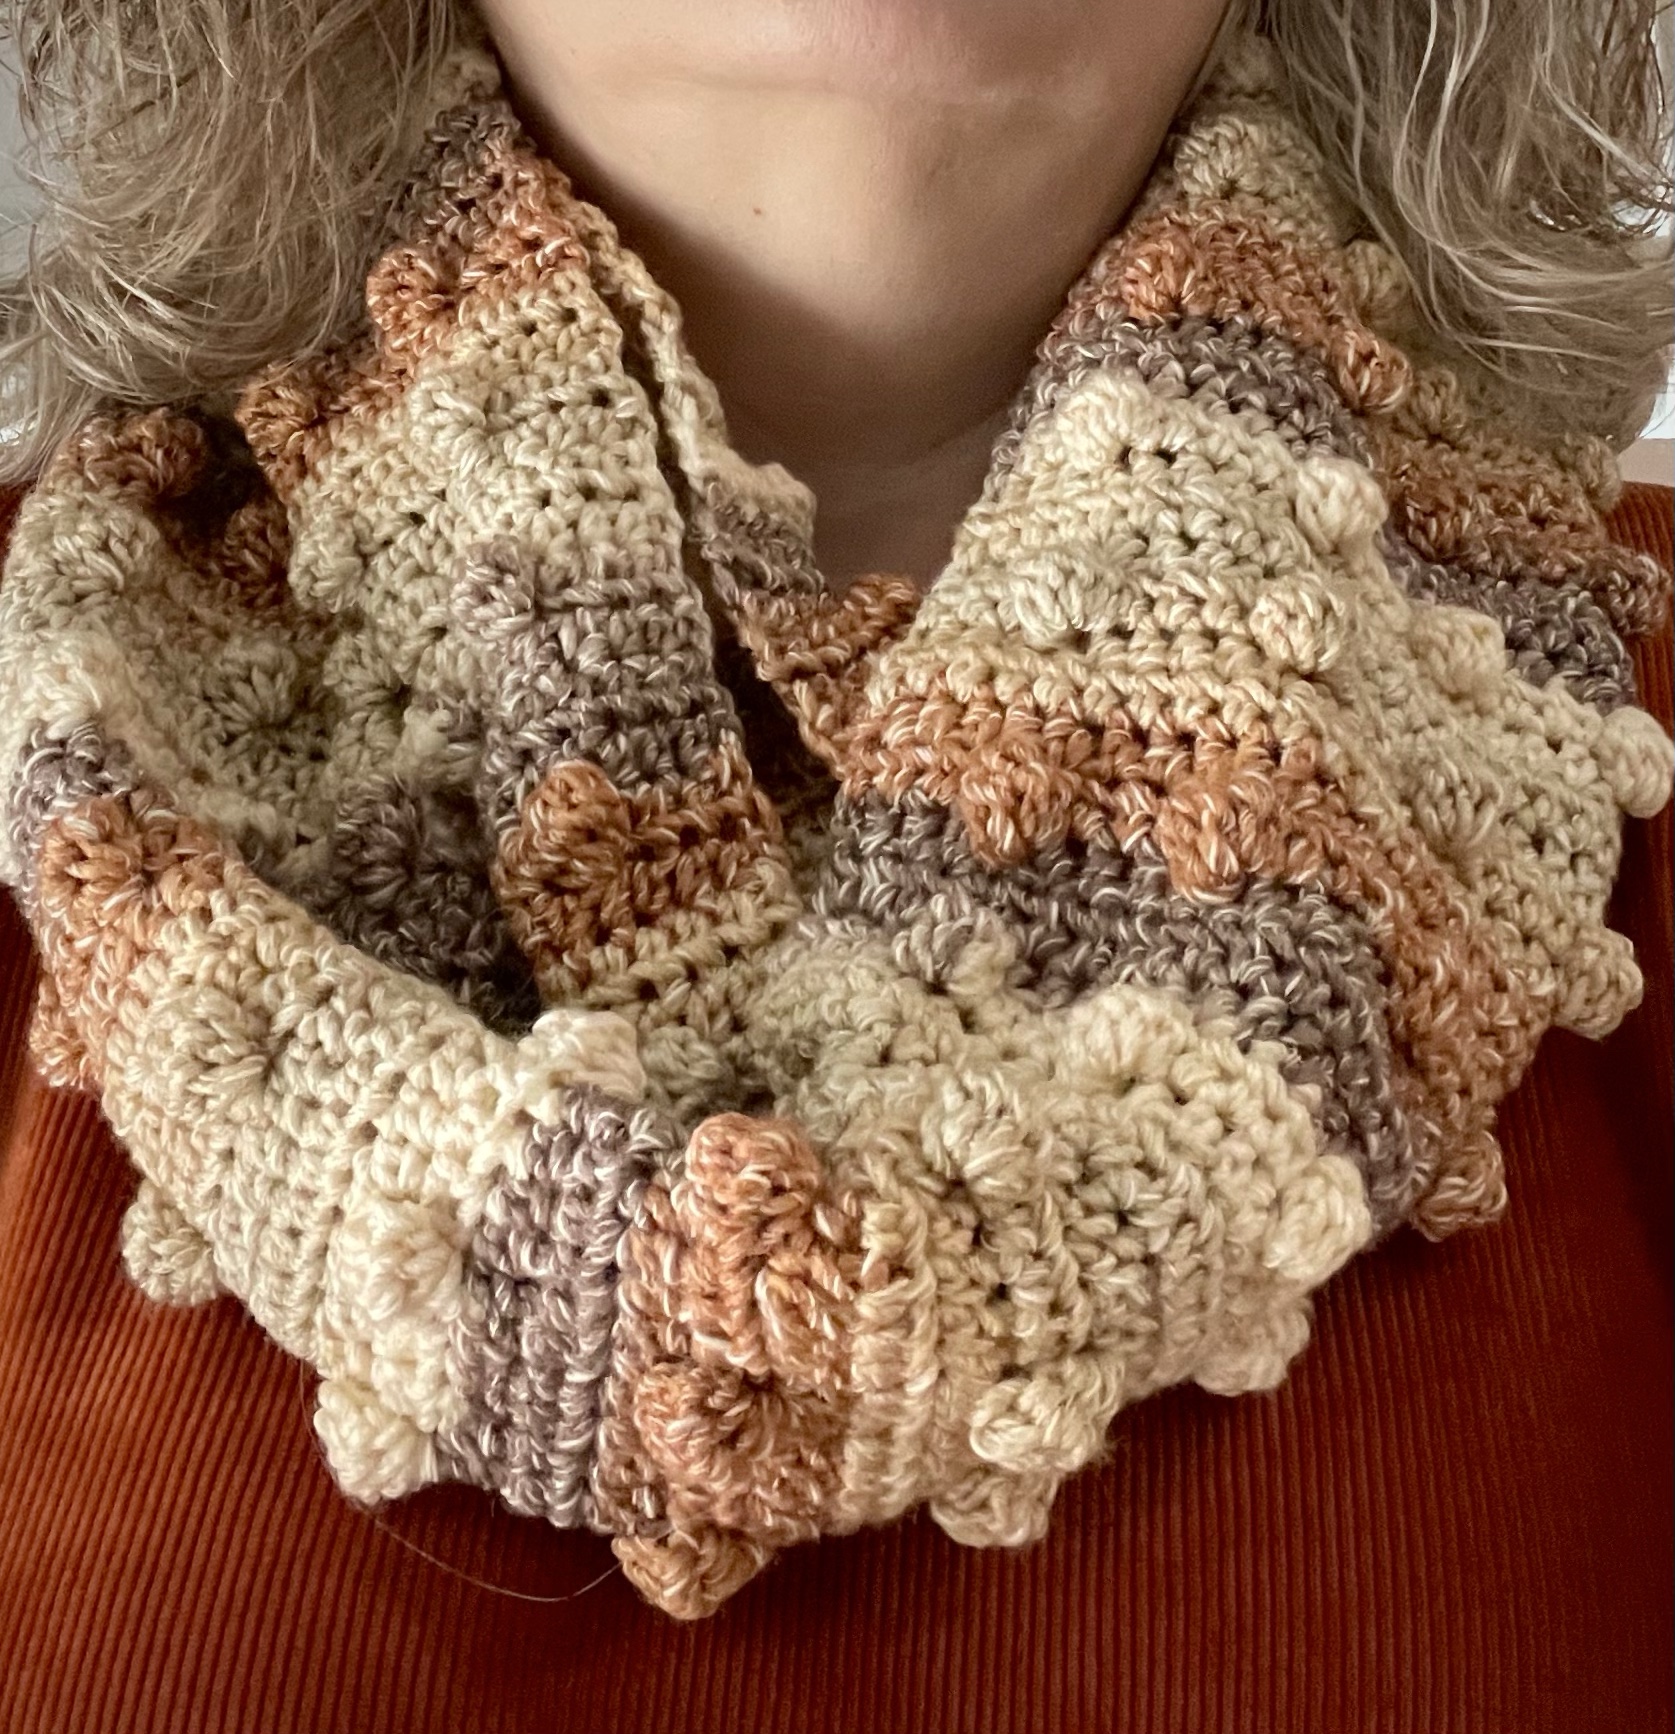 Vintage beige bobbly scarf made from crocheted cotton.